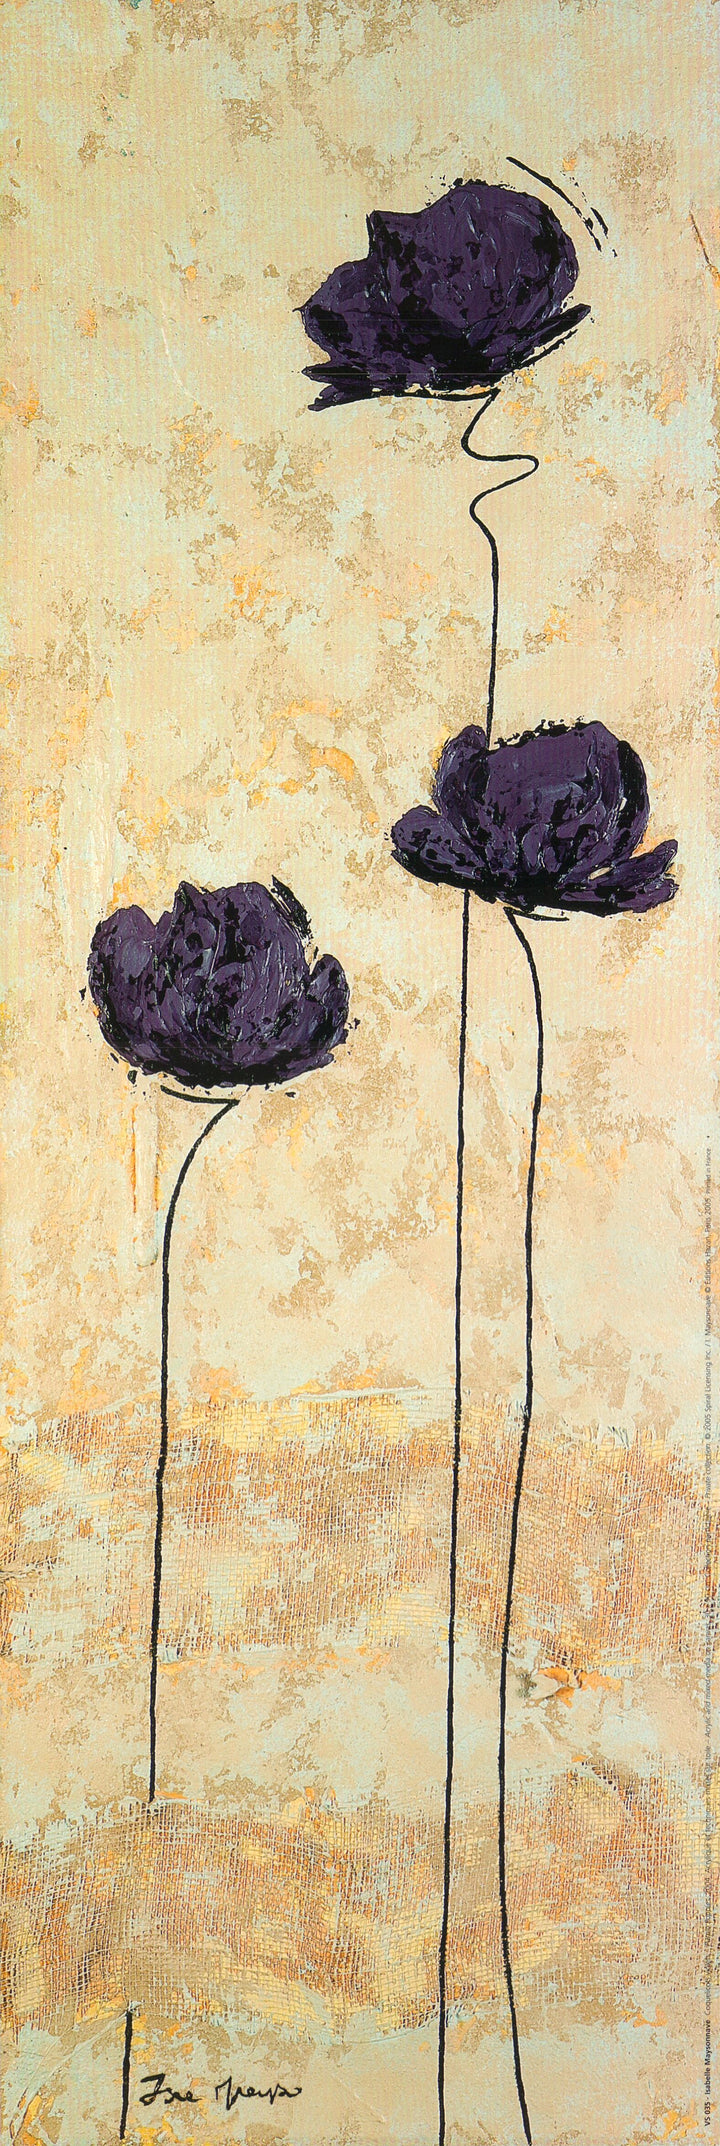 Purple Poppies, 2004 by Isabelle Maysonnave - 8 X 24 Inches (Art Print)